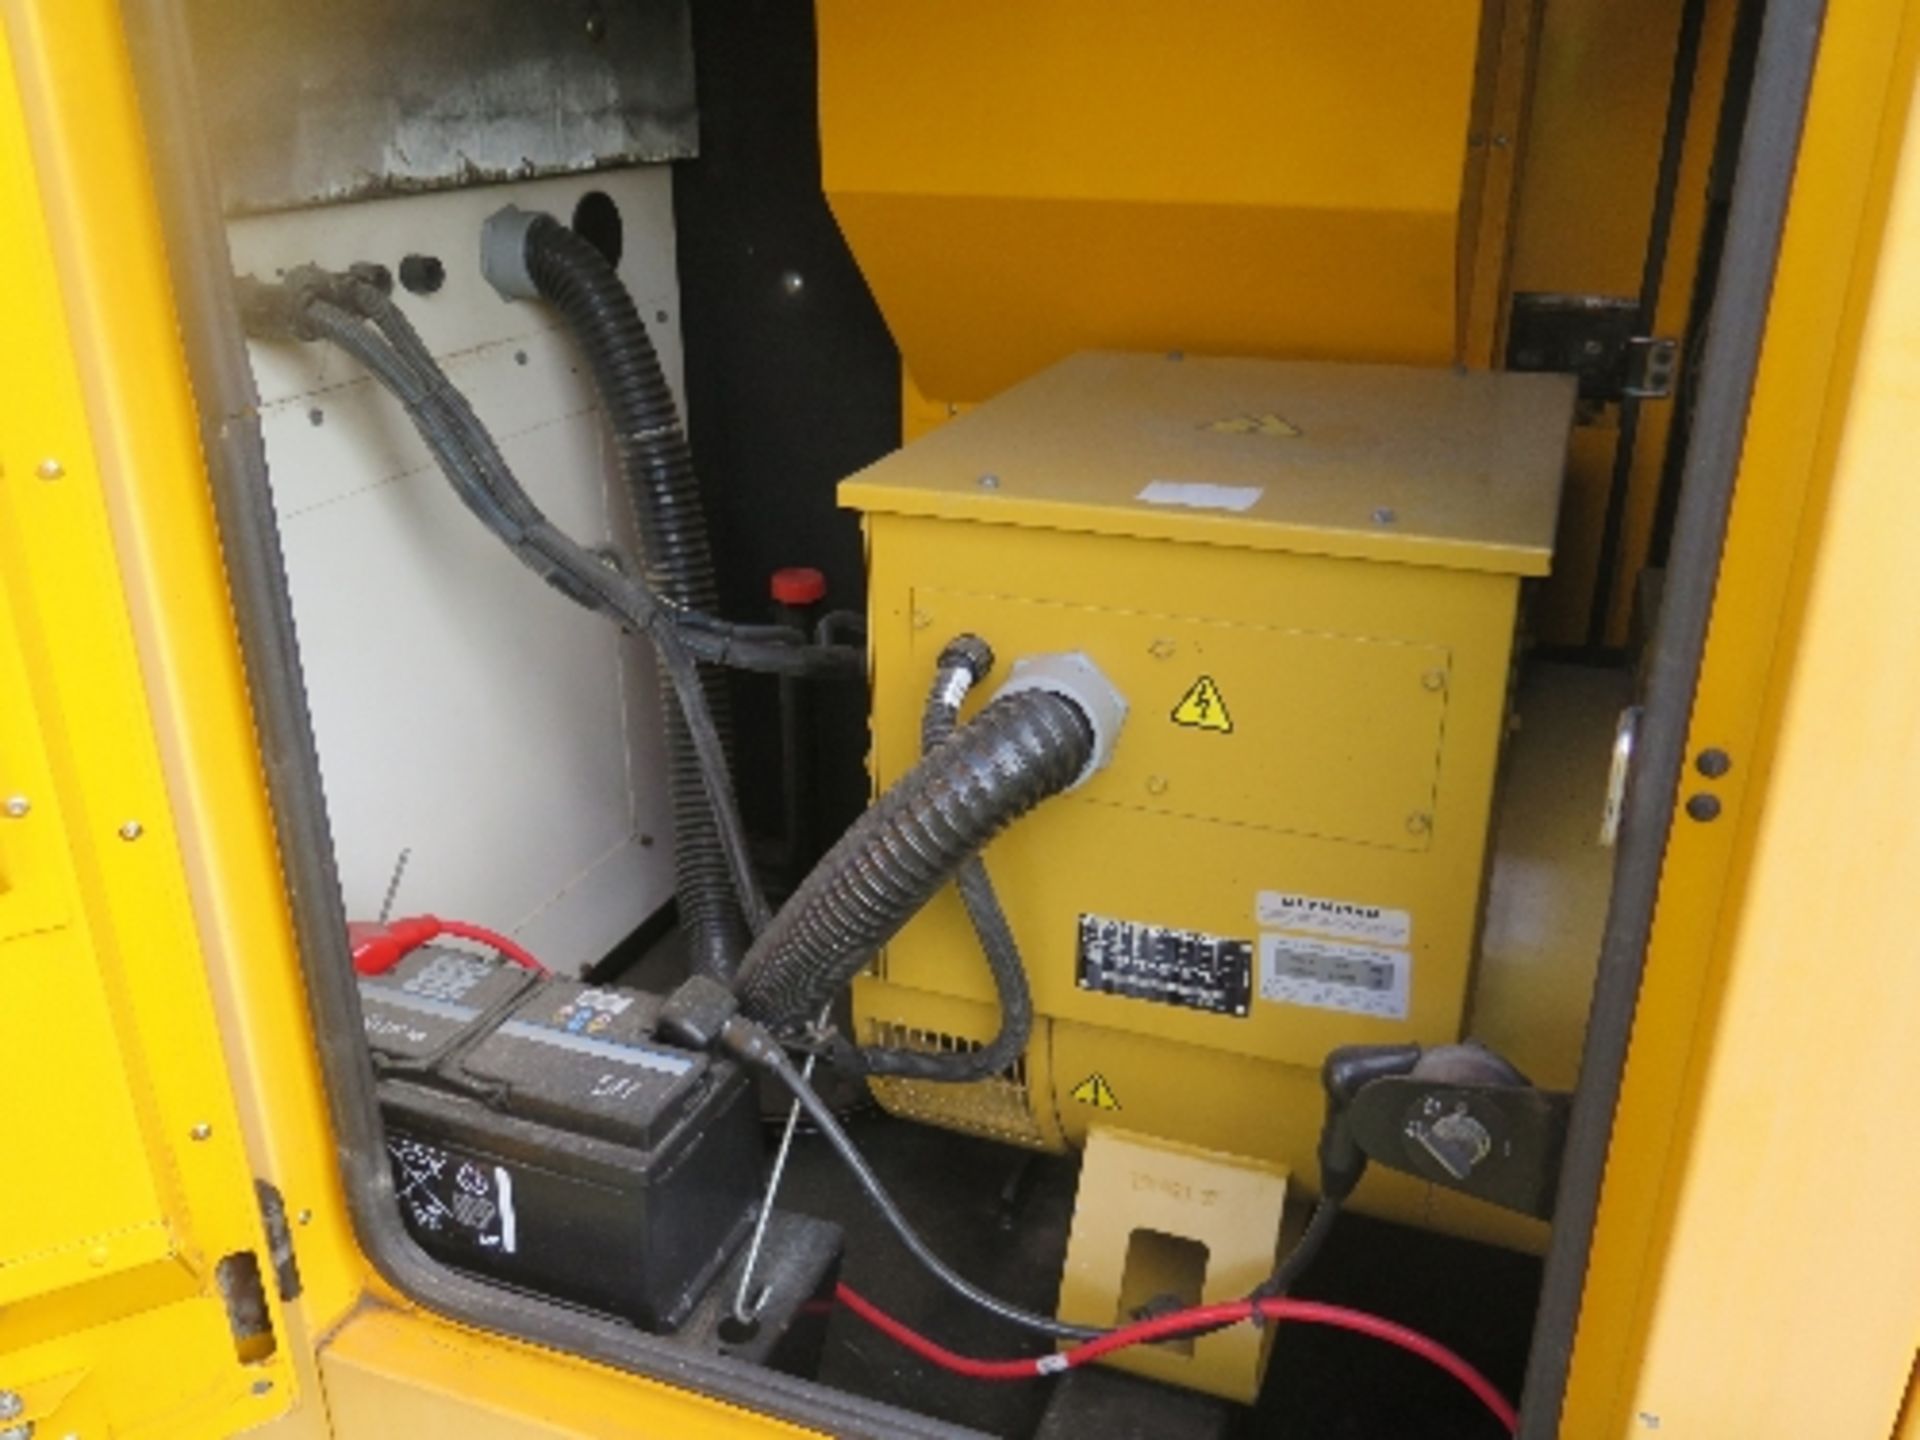 Caterpillar XQE100 generator 17983 hrs 158071
PERKINS - RUNS AND MAKES POWER
ALL LOTS are SOLD - Image 5 of 6